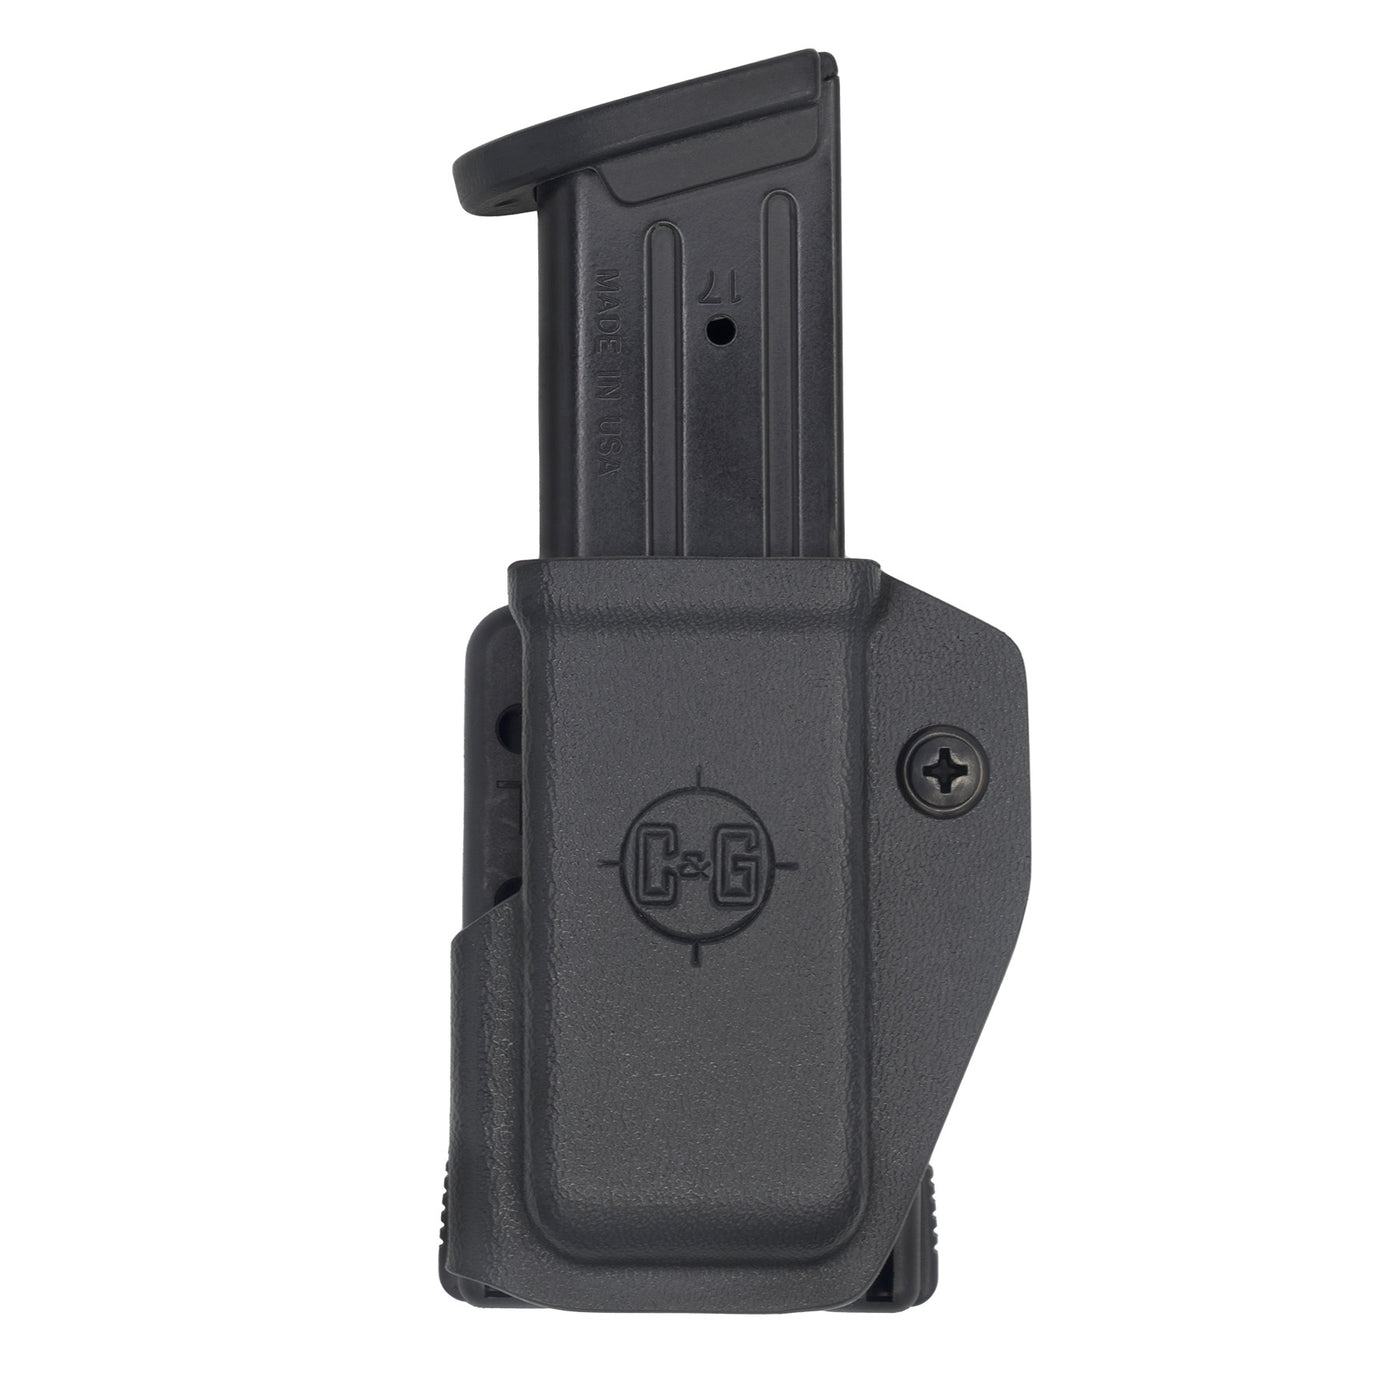 Metal 9/40 competition magazine holder